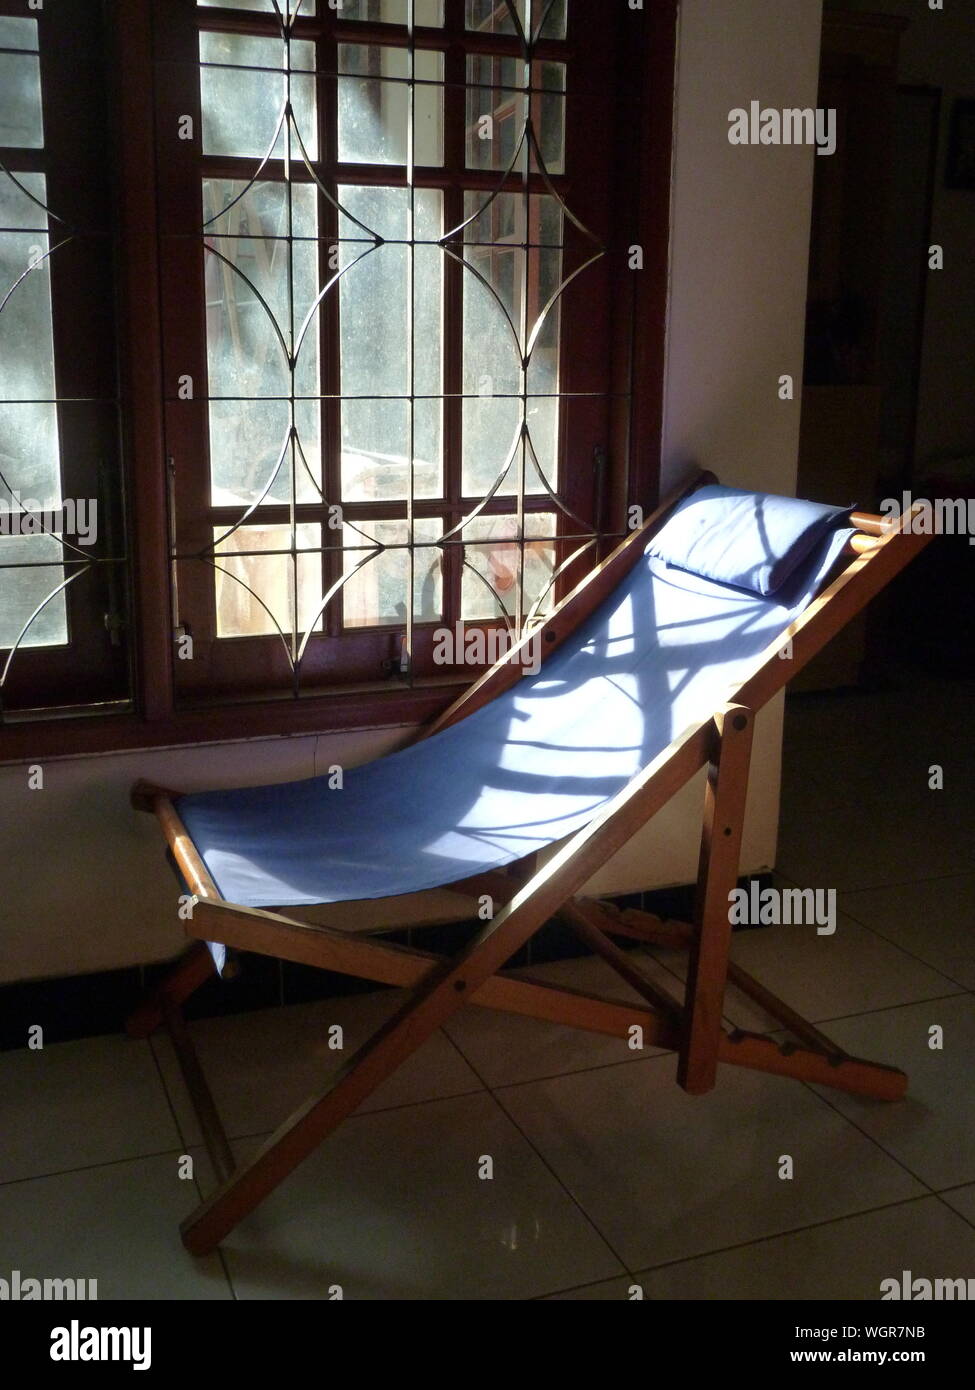 Foldable Chair By Window At Home Stock Photo